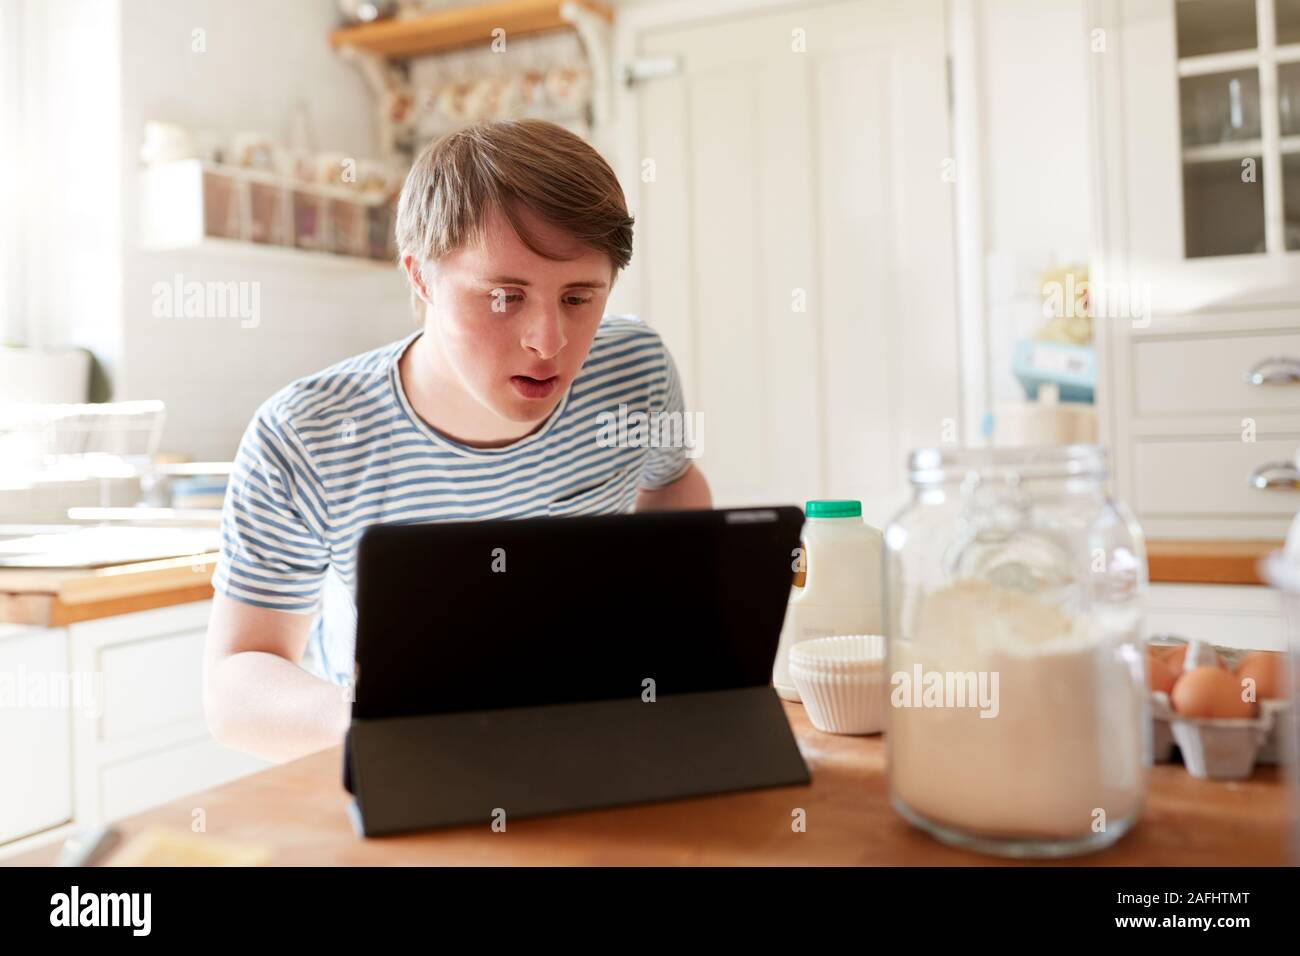 Young Man With Downs Syndrome Following Recipe On Digital Tablet To Bake Cake In Kitchen At Home Stock Photo